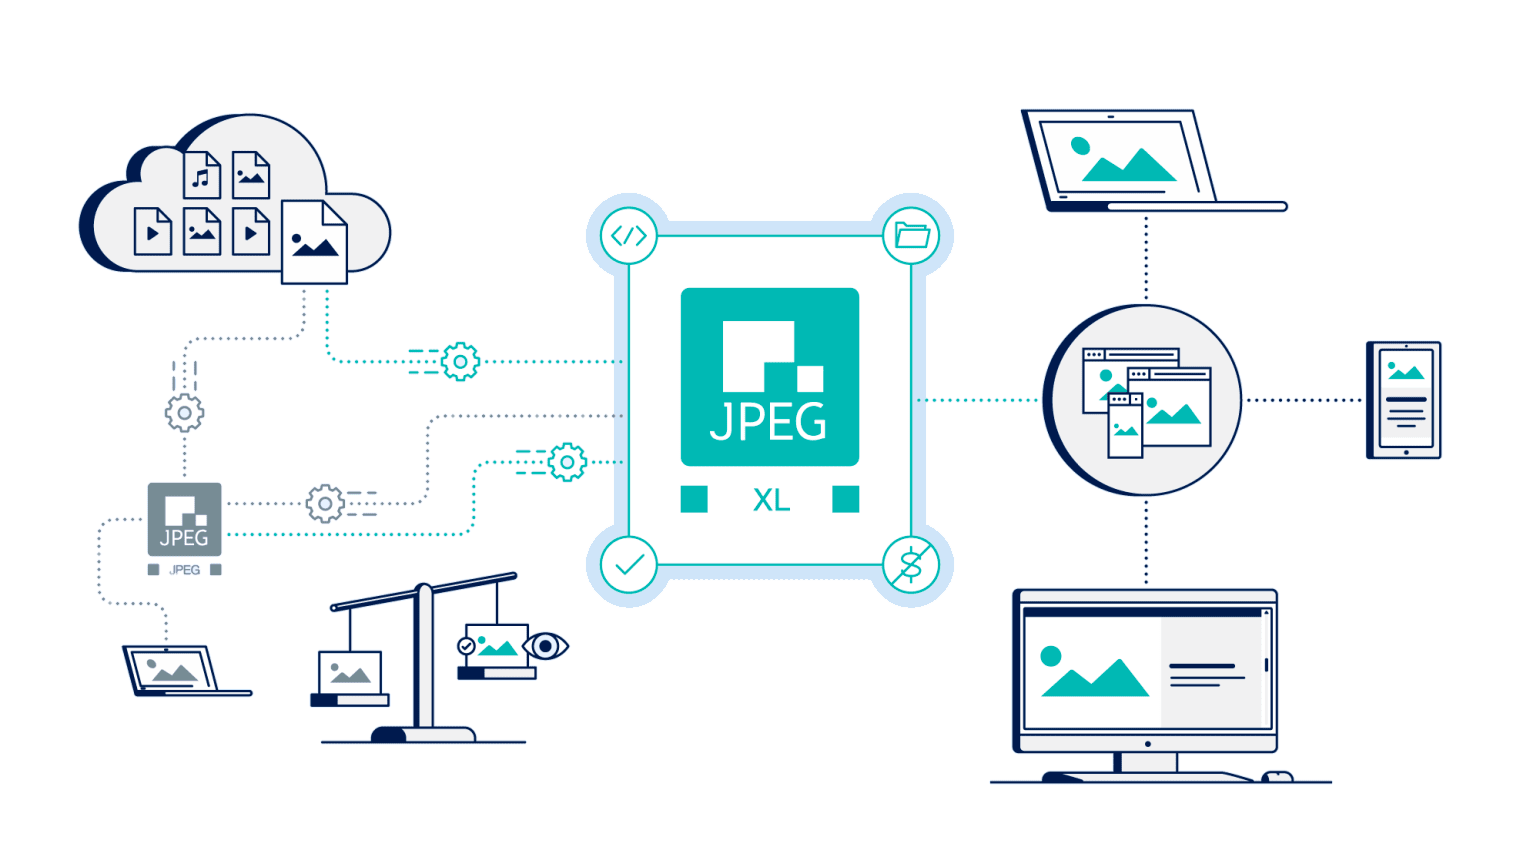 Illustration showing some of the key features of JPEG XL